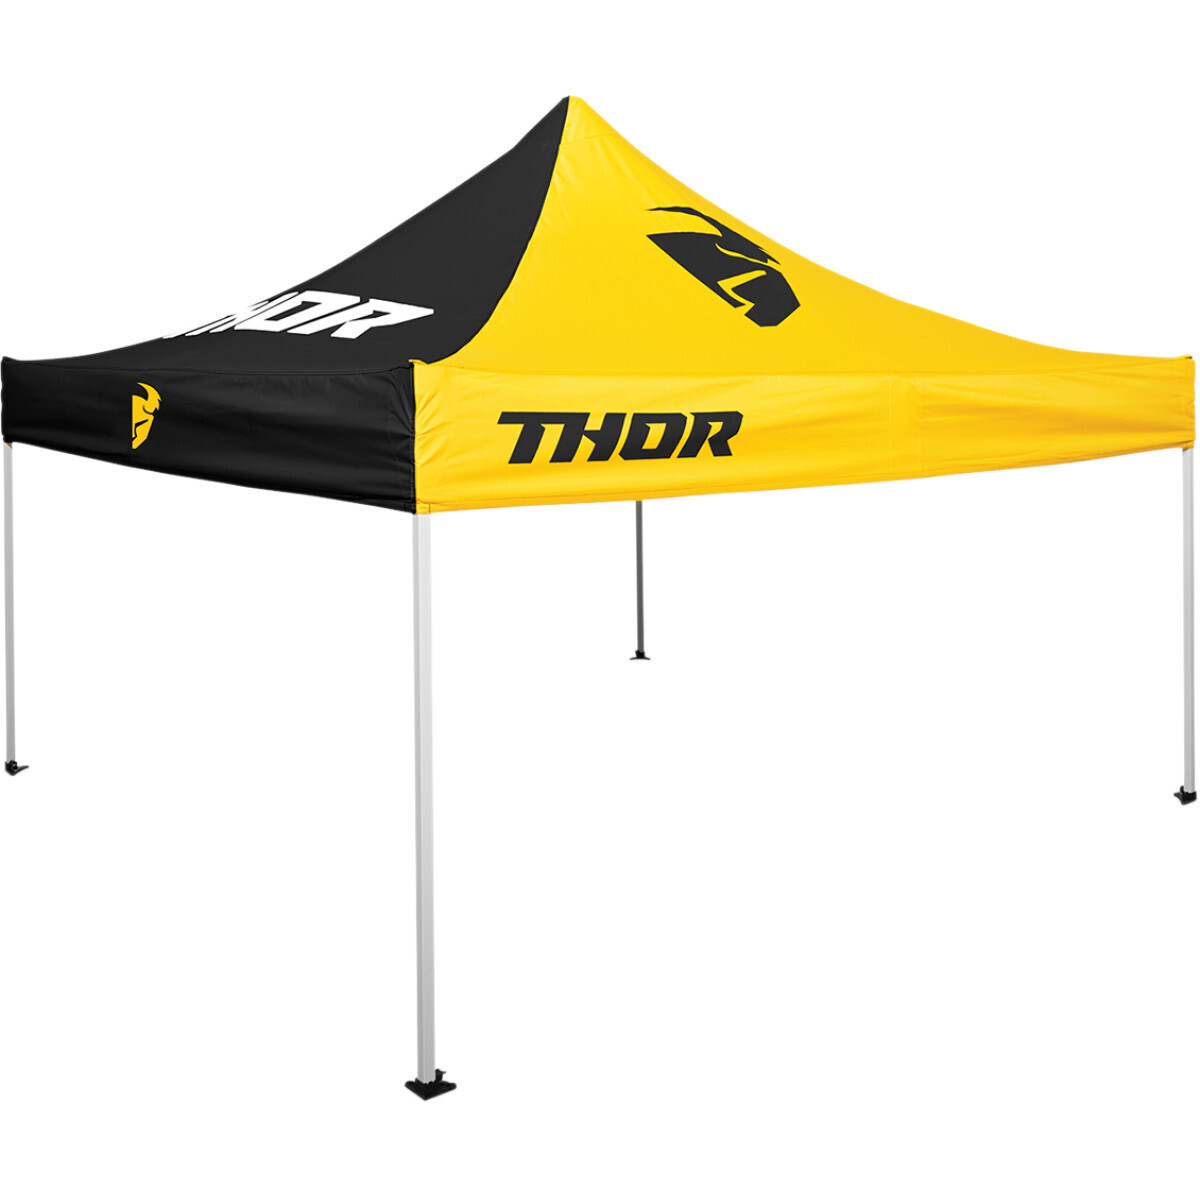 THOR
TRACK S17 CANOPY BLACK/YELLOW